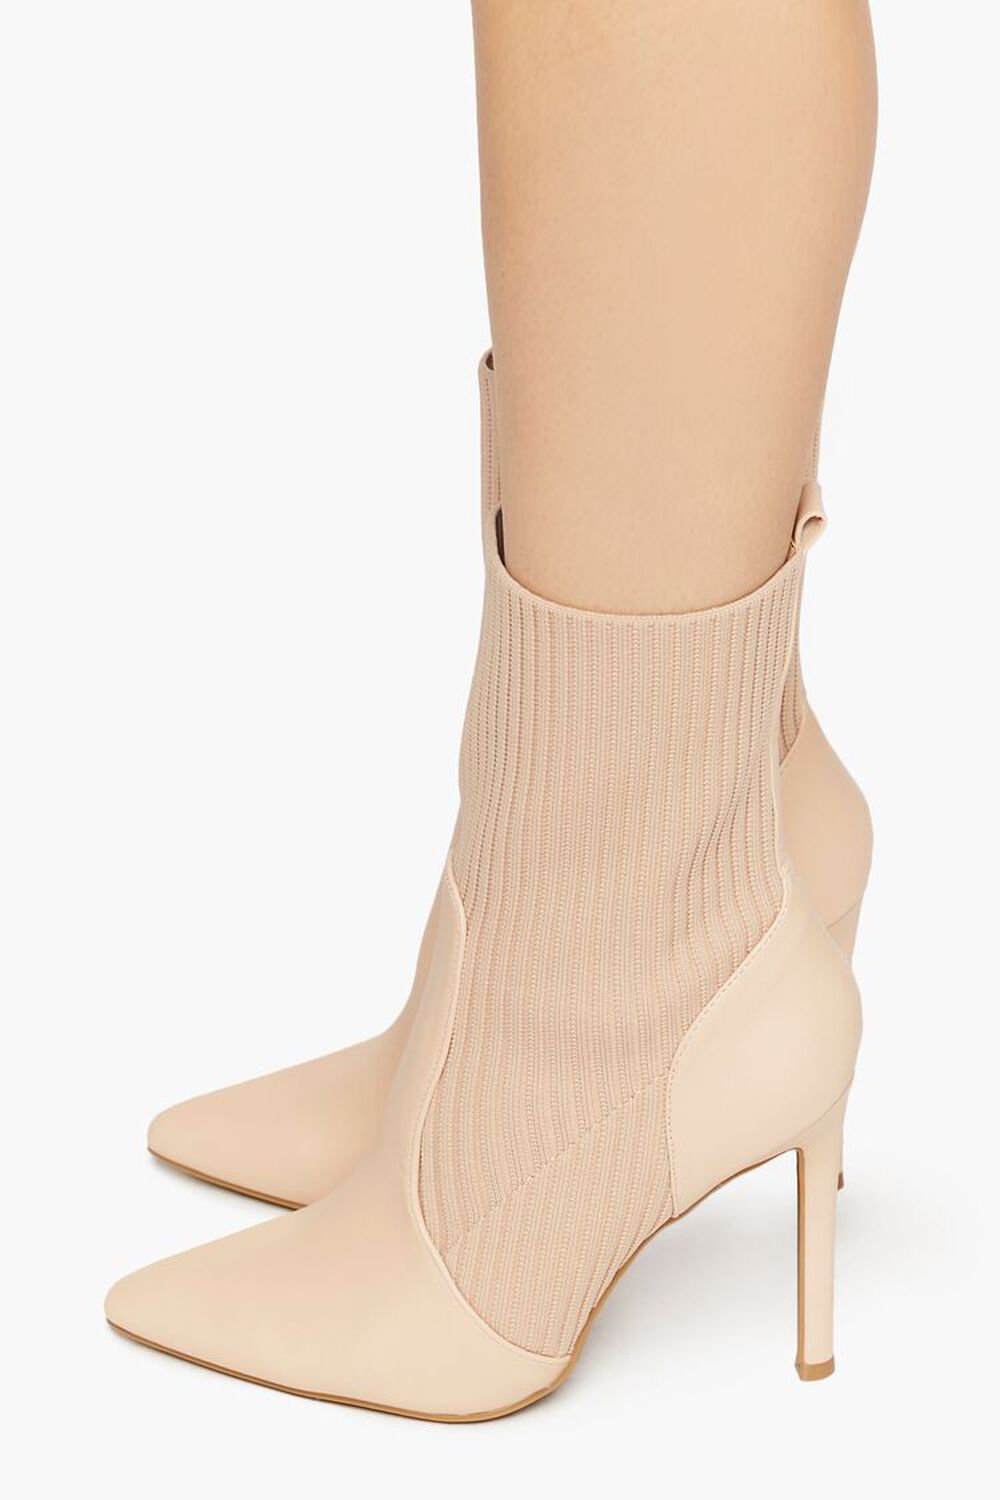 NUDE Faux Leather-Trim Sock Booties, image 2